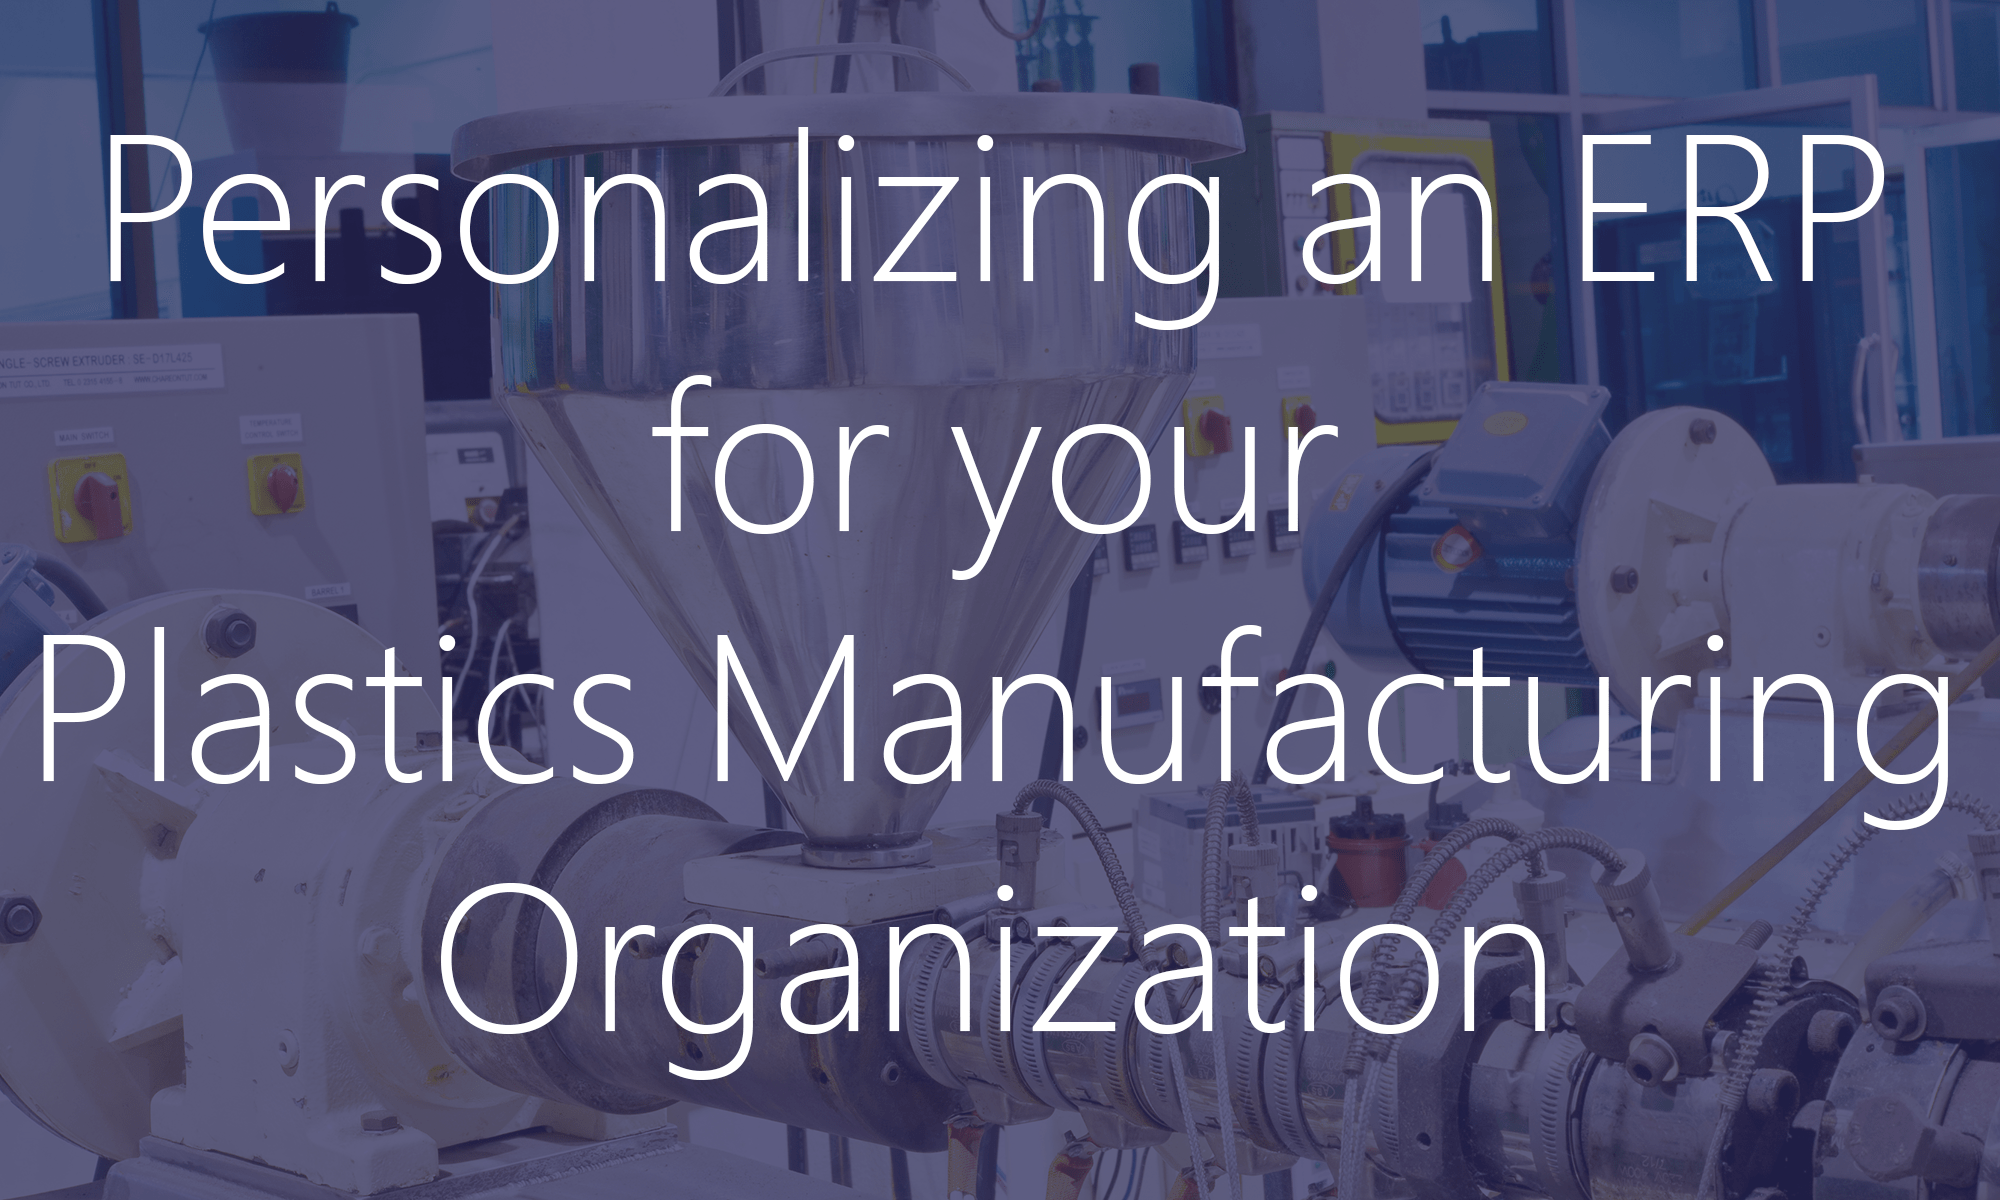 Personalizing an ERP for Plastics Manufacturing